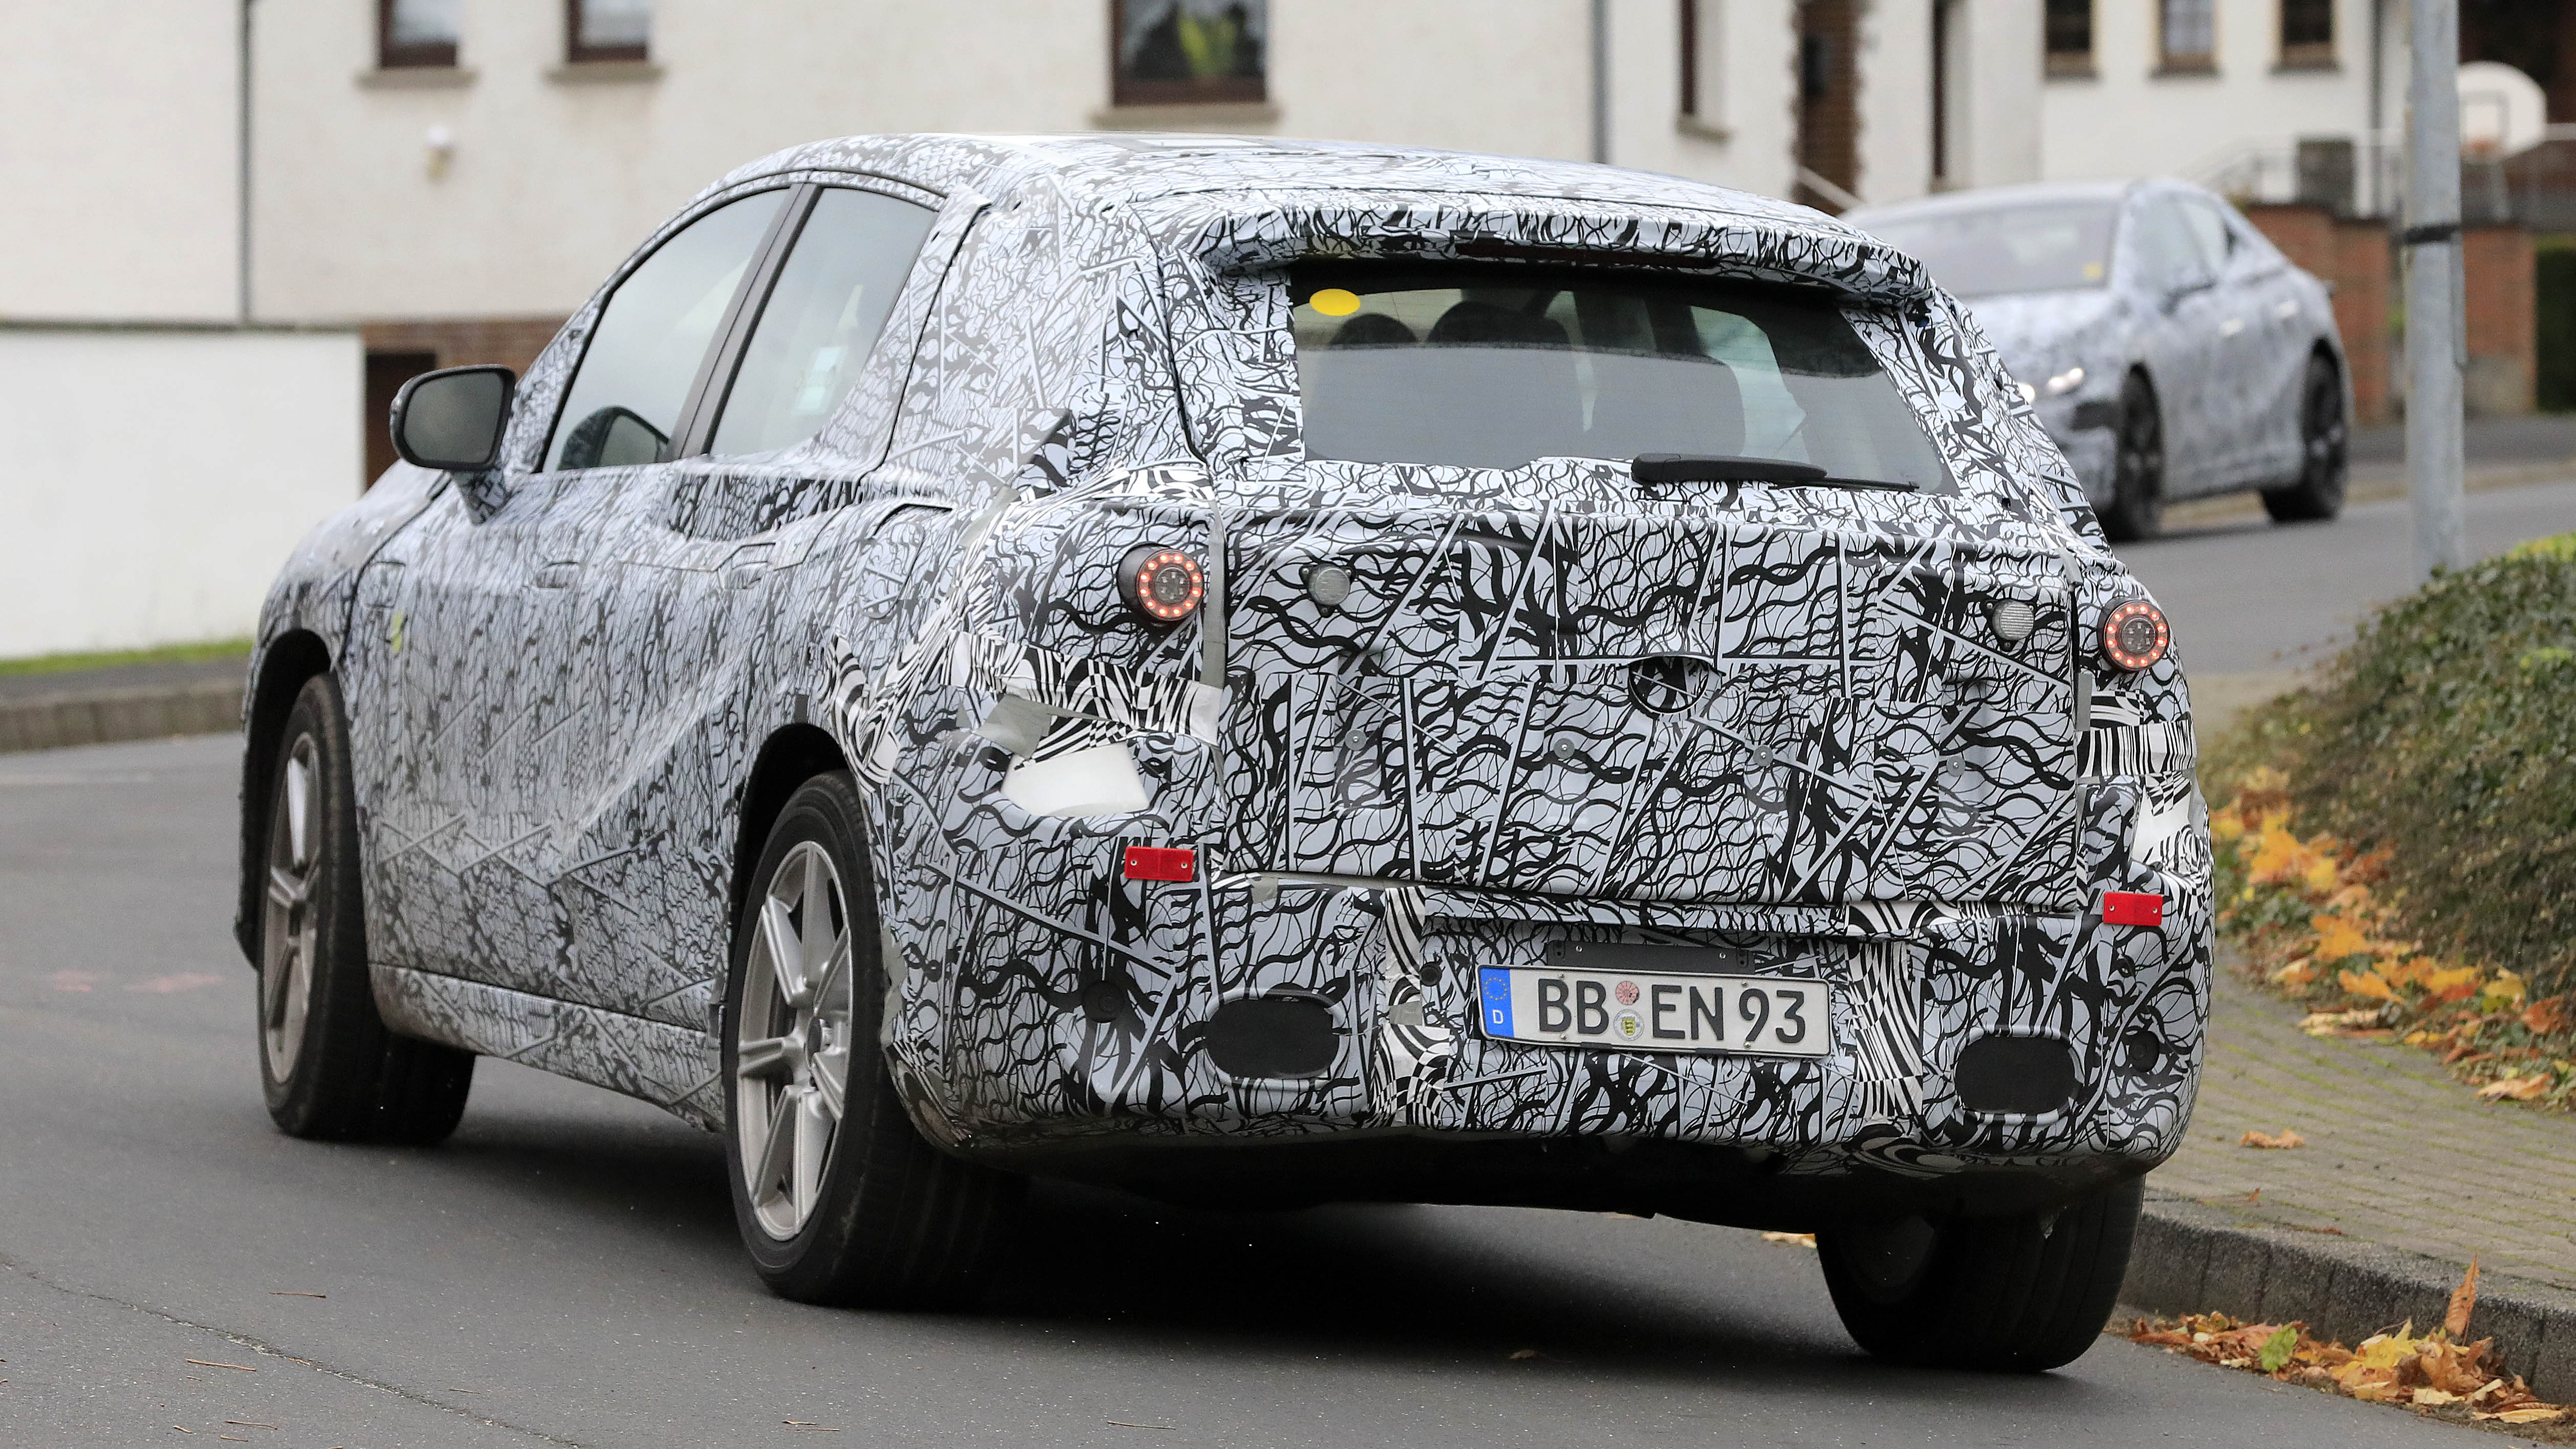 Mercedes EQS SUV spotted testing pictures | DrivingElectric